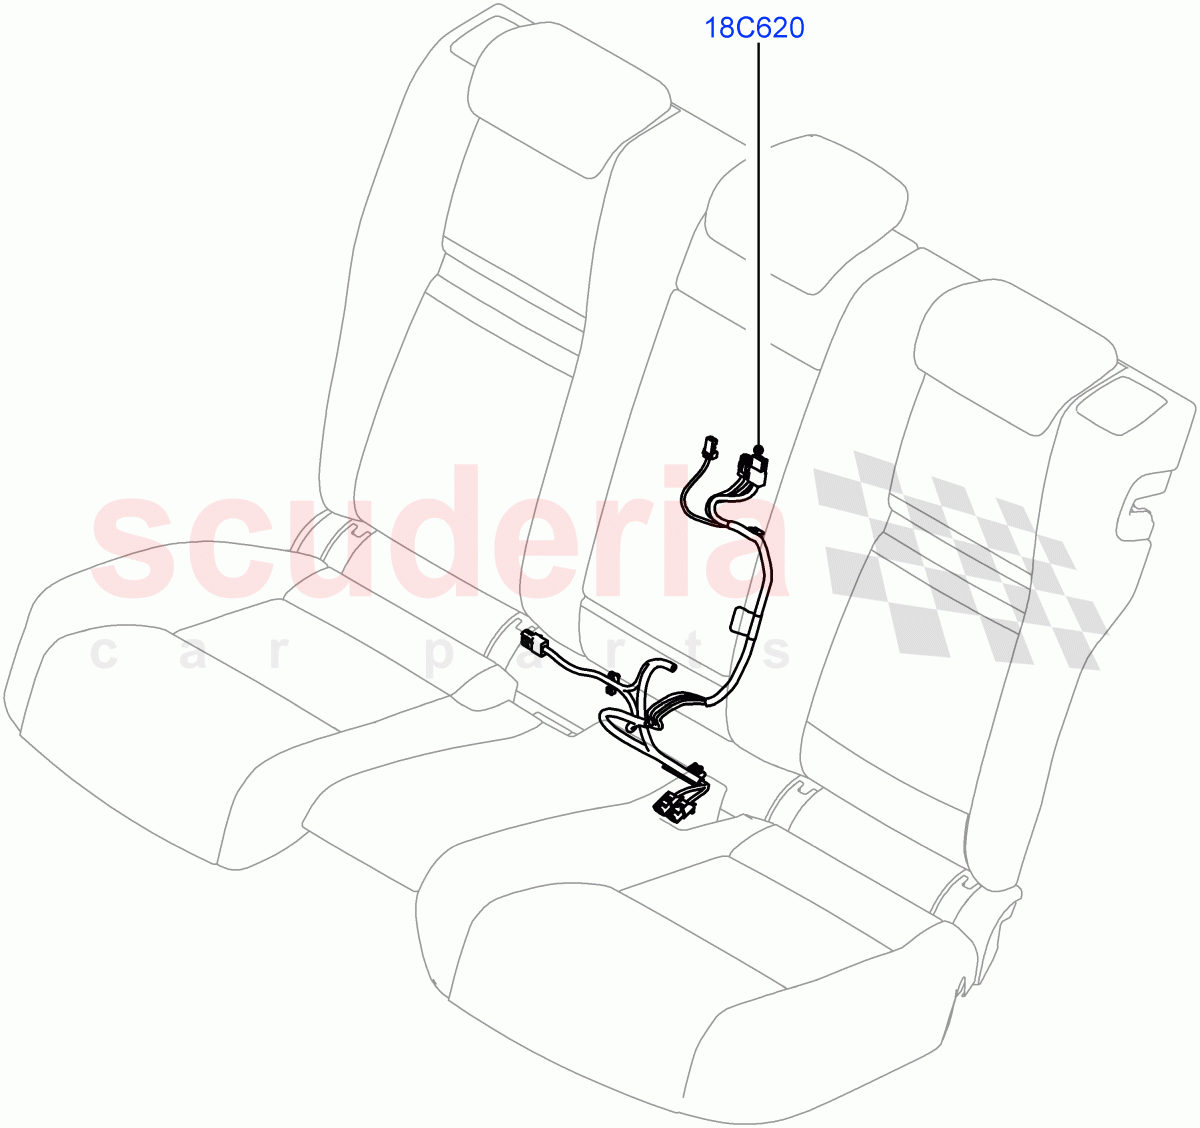 Wiring - Seats(2nd Row, Rear Seats)(Premium Air Conditioning-Front/Rear) of Land Rover Land Rover Range Rover Velar (2017+) [5.0 OHC SGDI SC V8 Petrol]